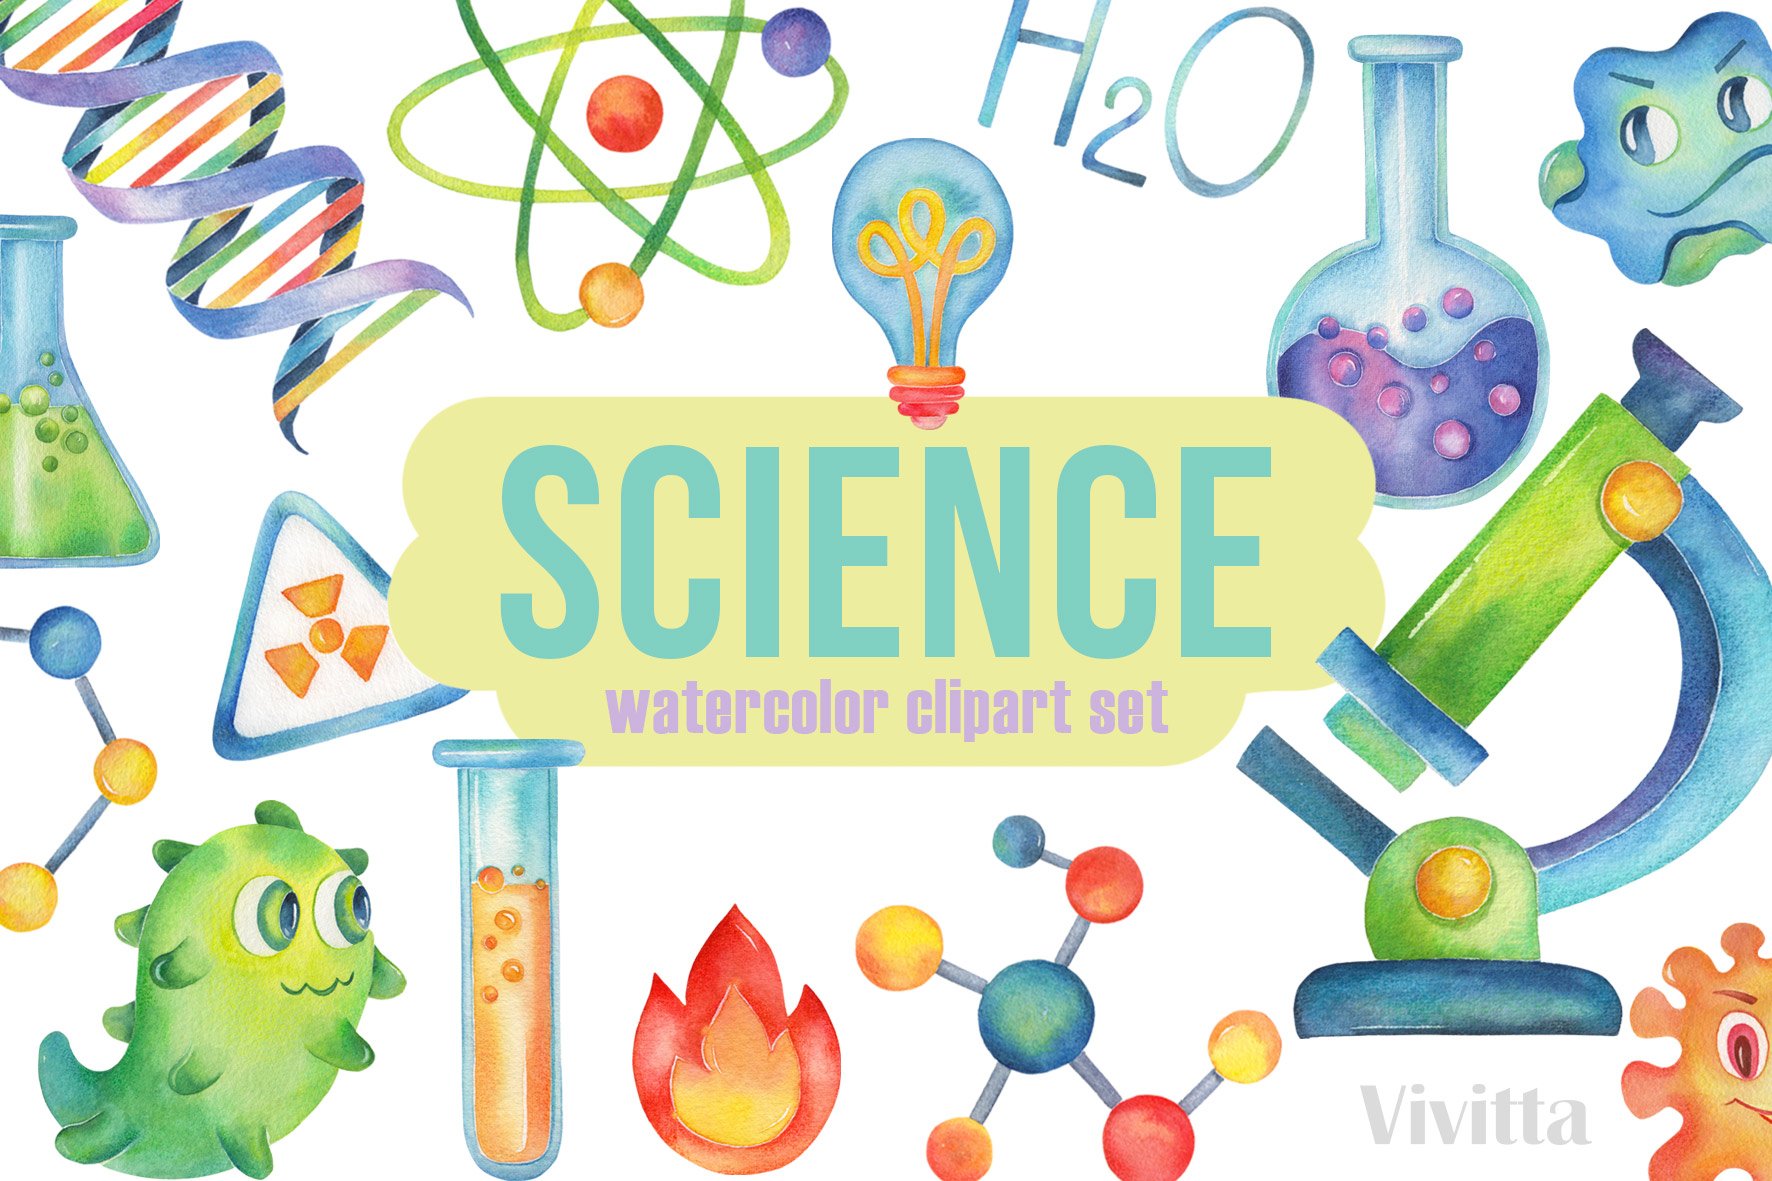 Science watercolor clipart,Chemistry cover image.